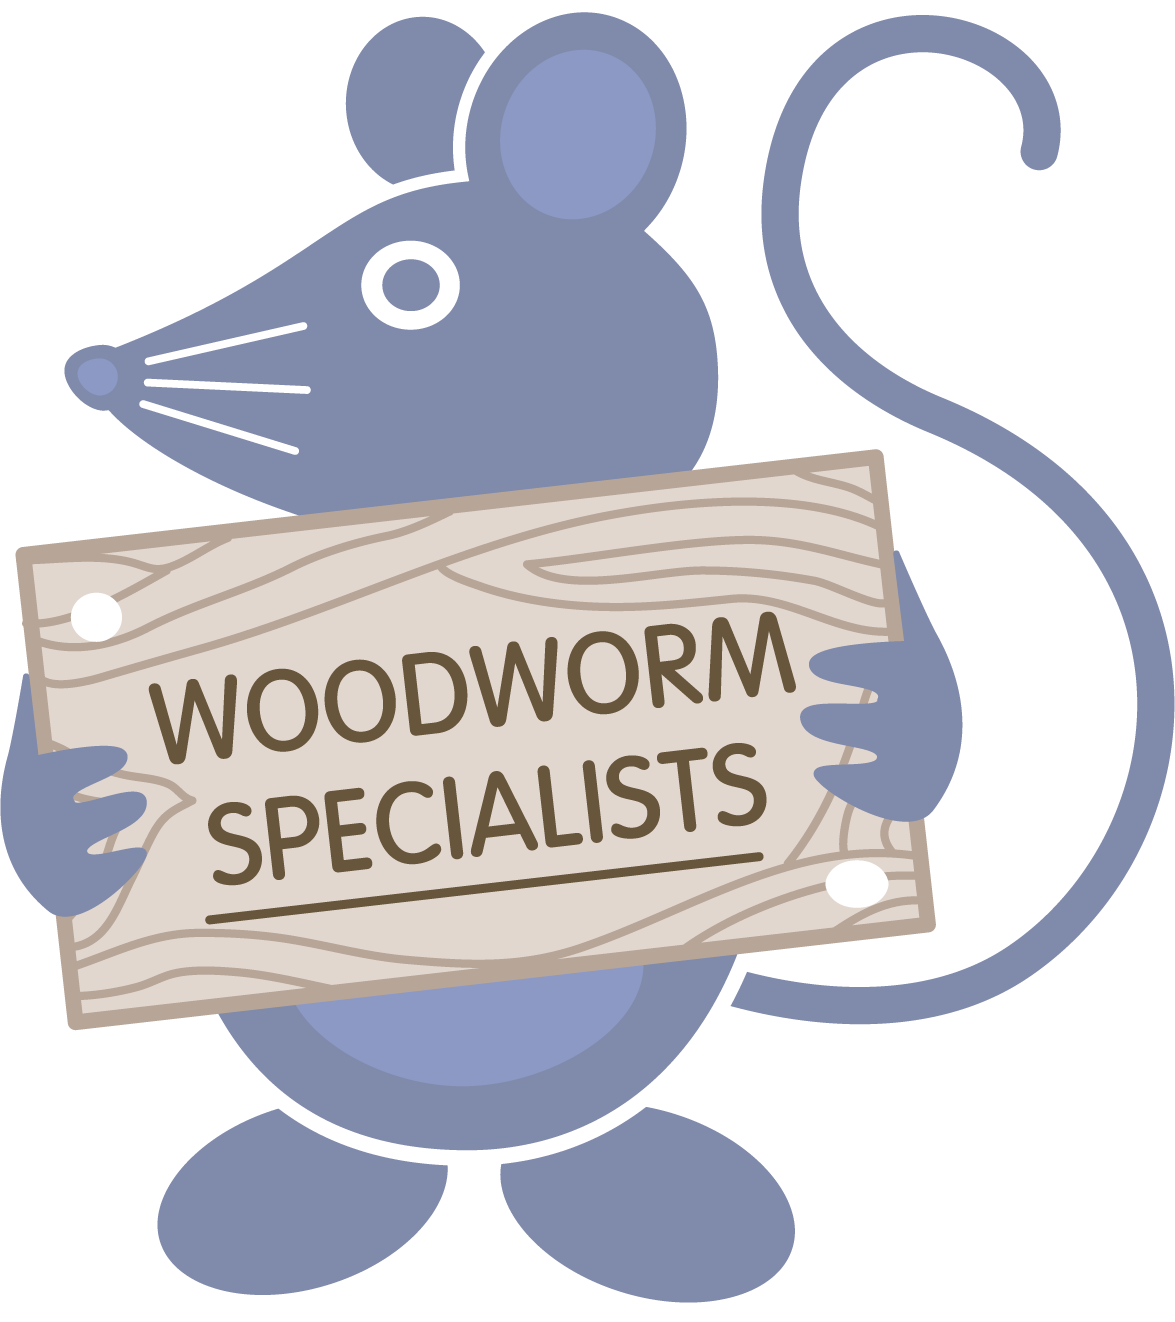 Woodworm specialist